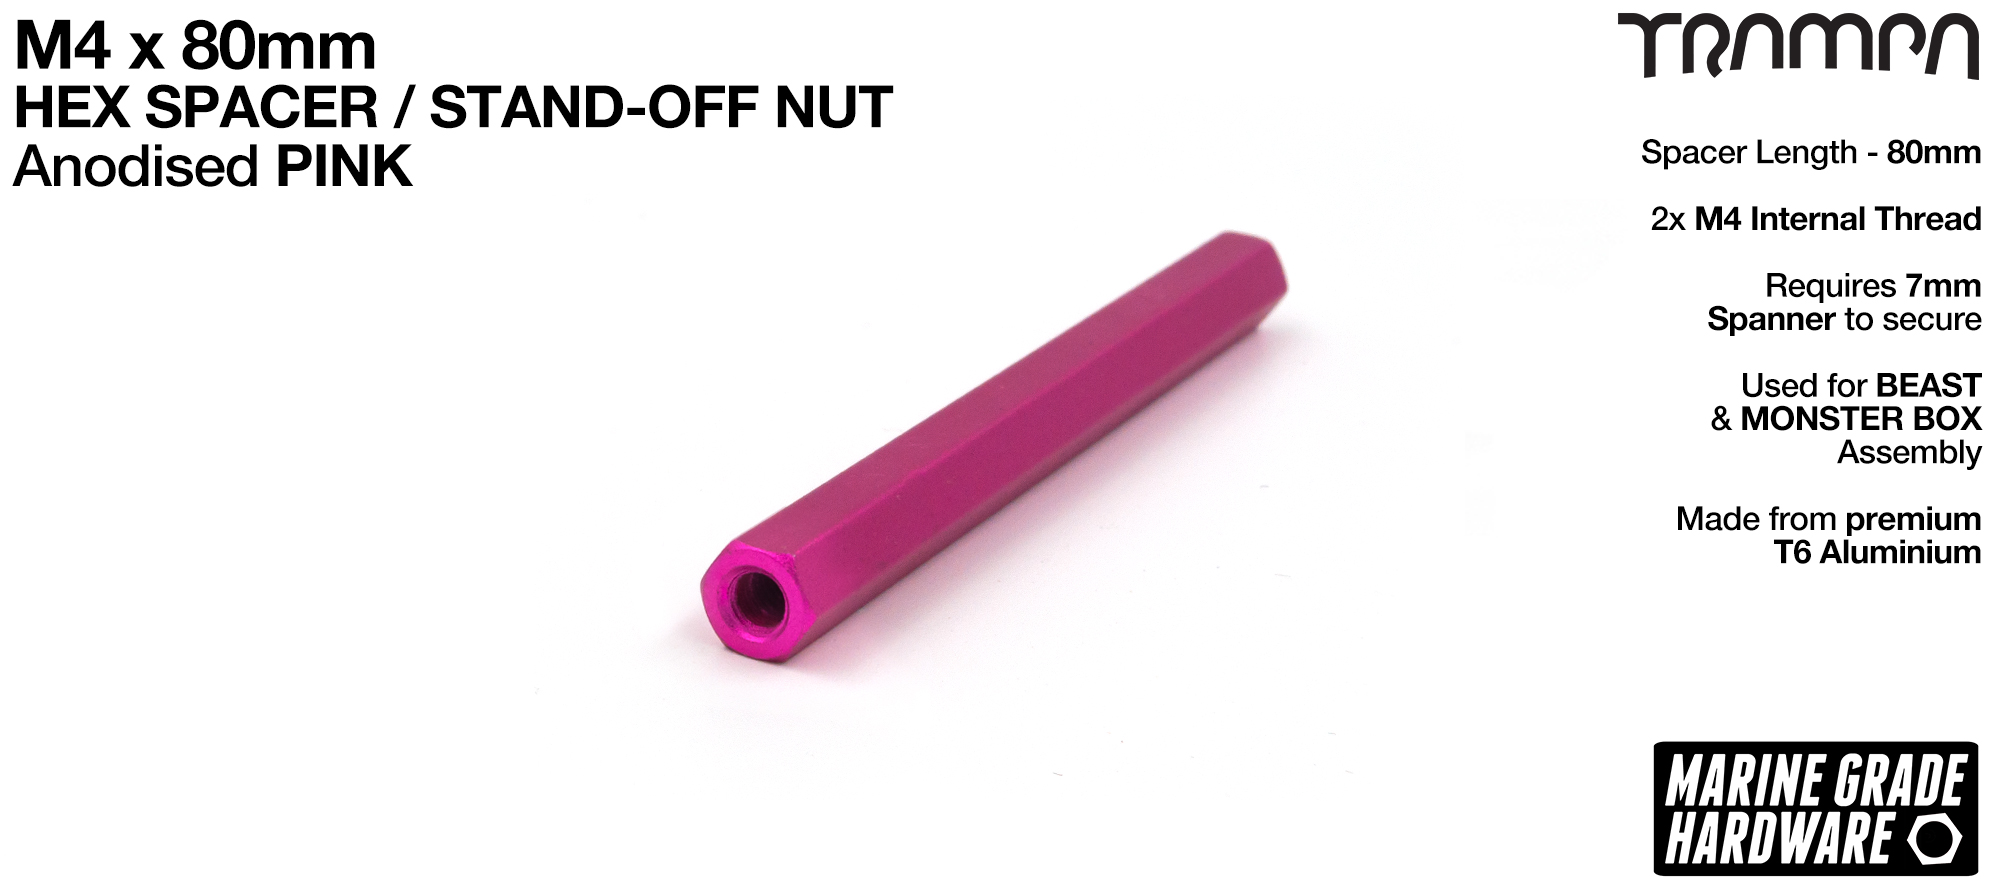 M4 x 80mm Aluminium Threaded Spacer Nut Used for assembling the BEAST Battery Boxes - PINK